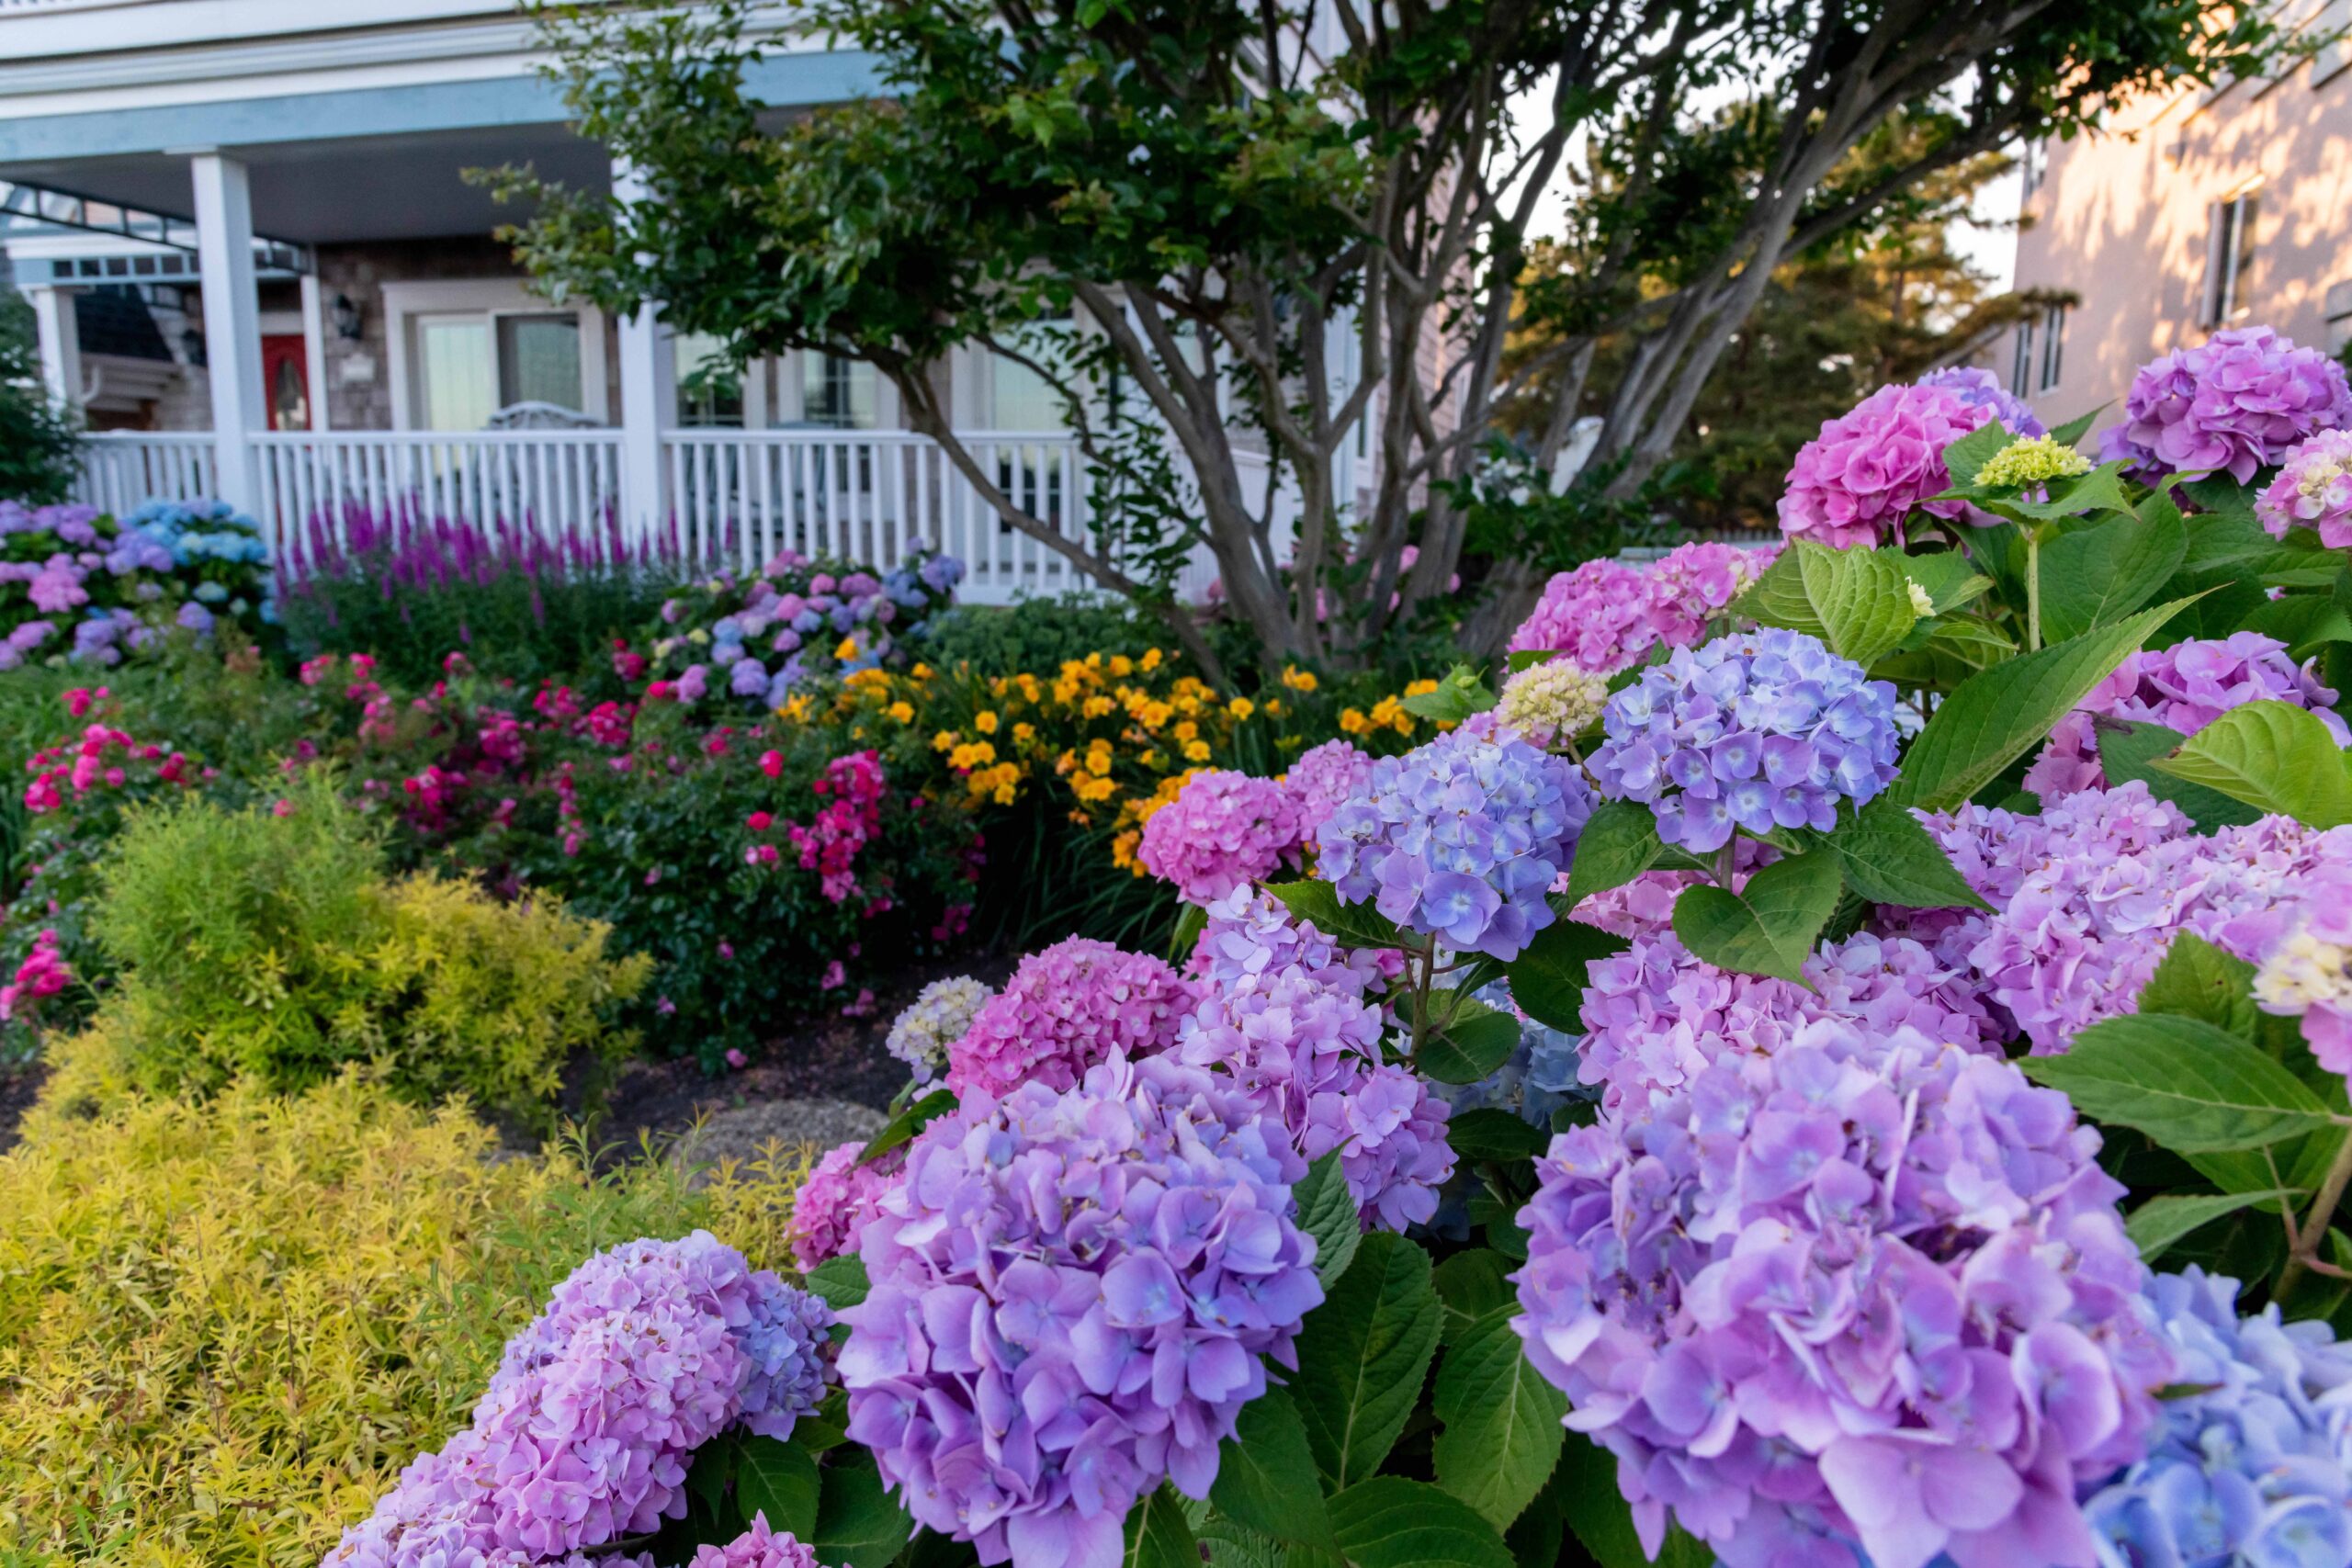 Pink, purple, and blue hydrangea flowers in front of a garden of pink roses, yellow tigerlilies, purple salvia, and more hydrangea bushes with a front porch